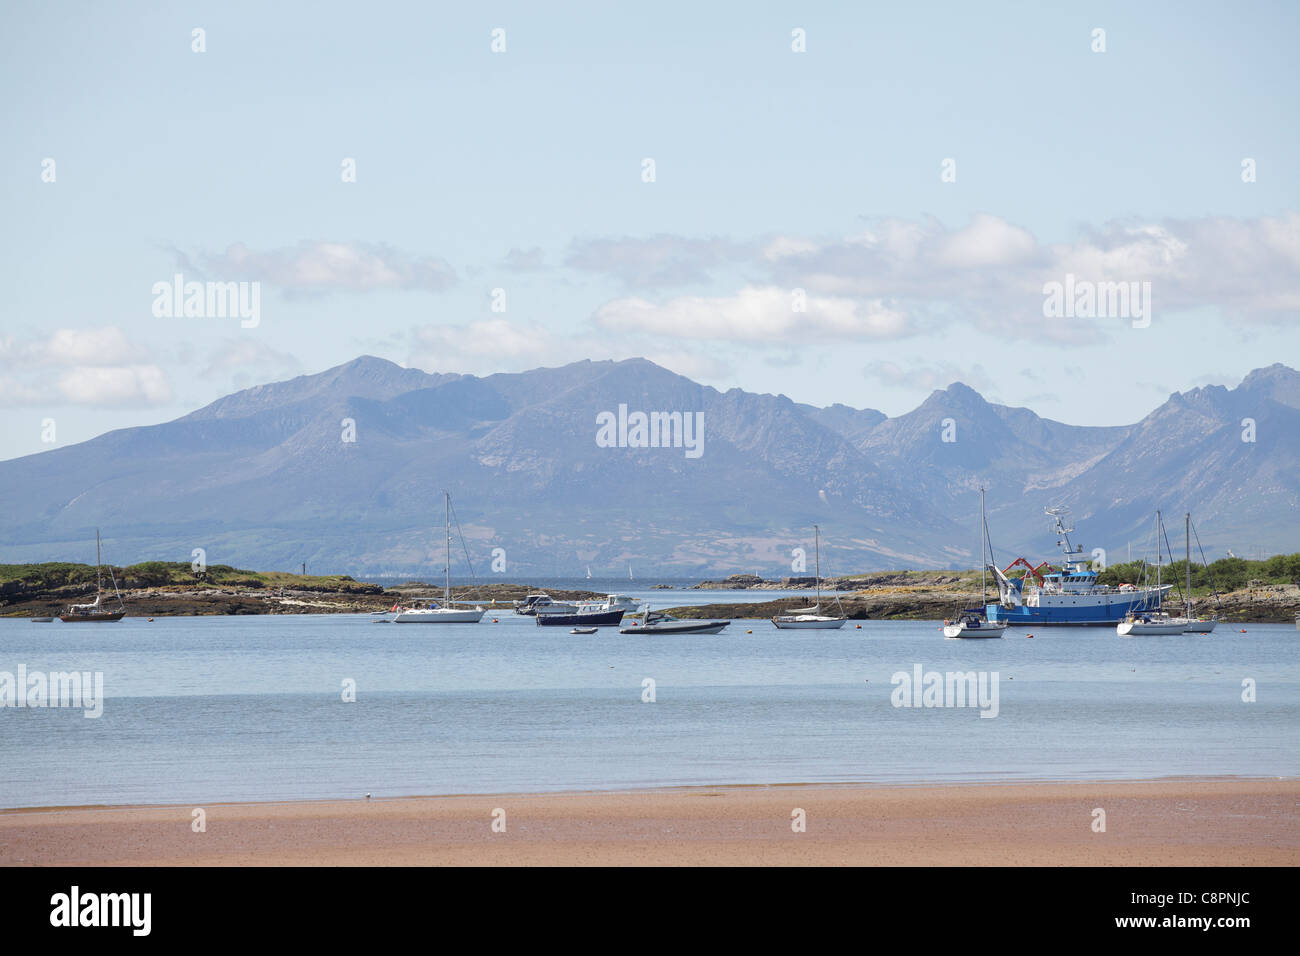 Kames Bay, Millport on the Island of Great Cumbrae with the mountains of Arran in the background, North Ayrshire, Scotland, UK Stock Photo